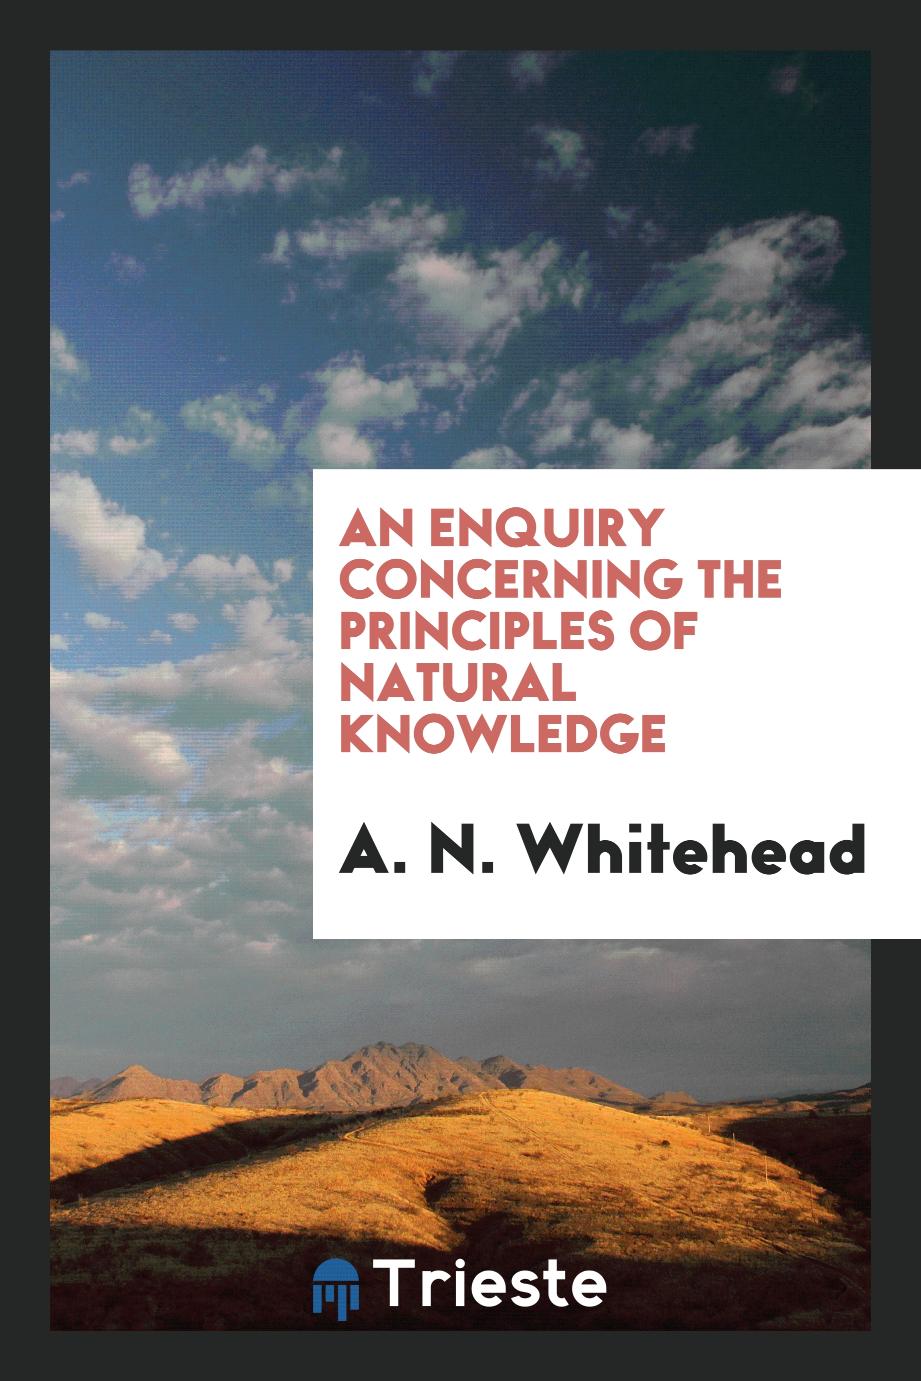 An enquiry concerning the principles of natural knowledge